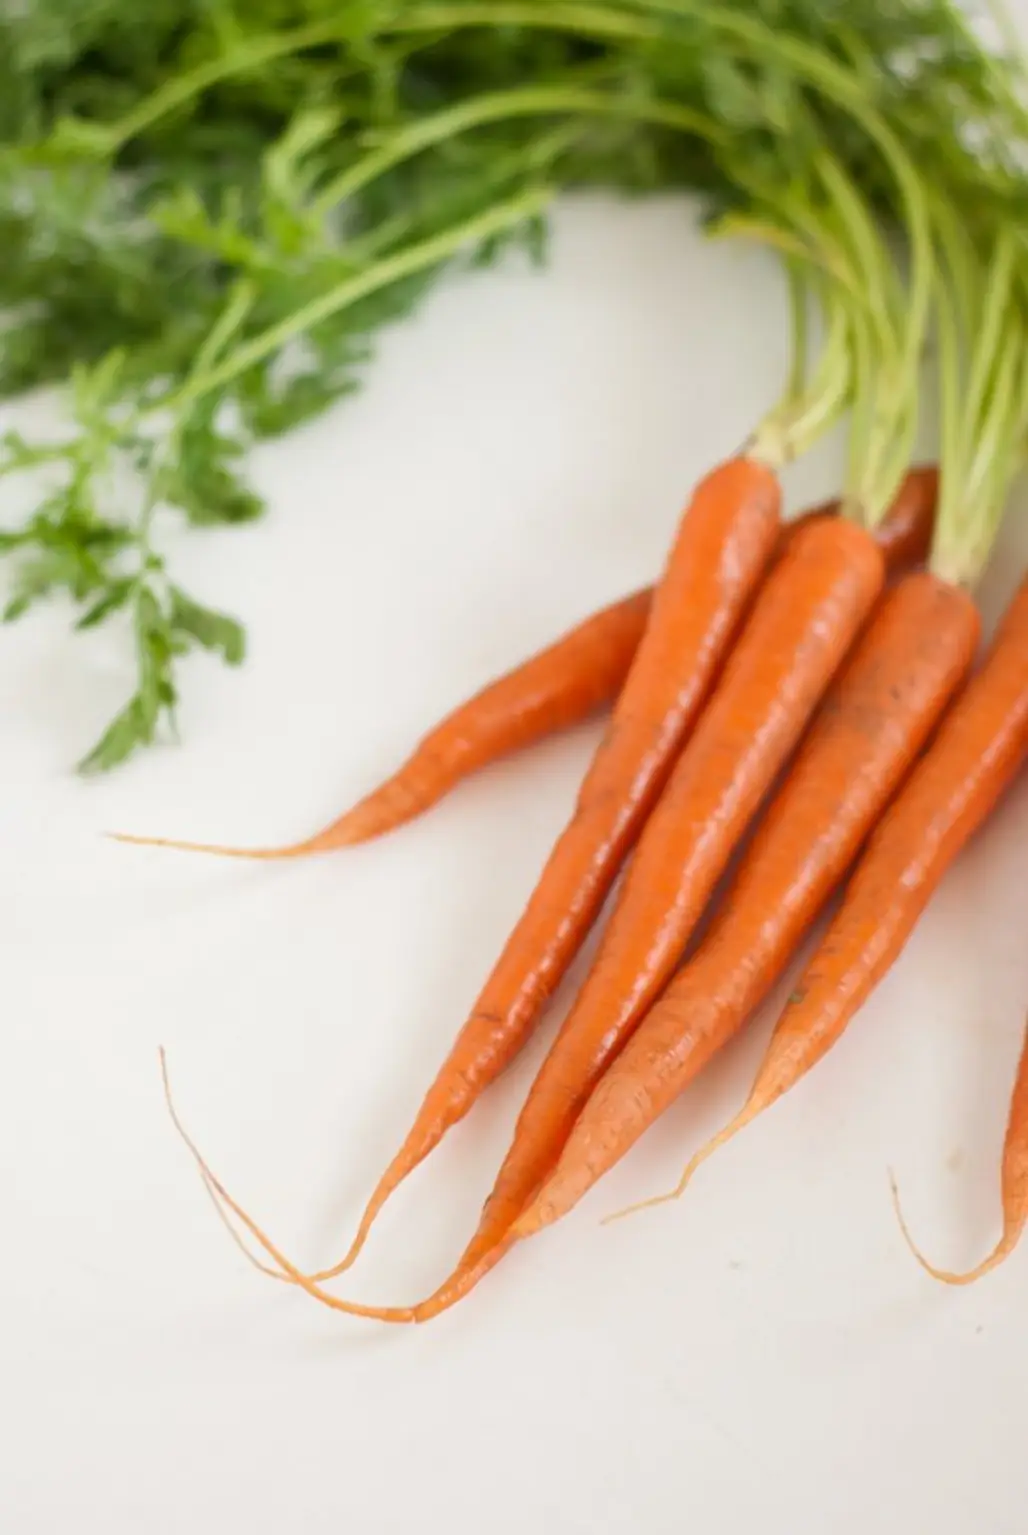 carrot,food,vegetable,produce,